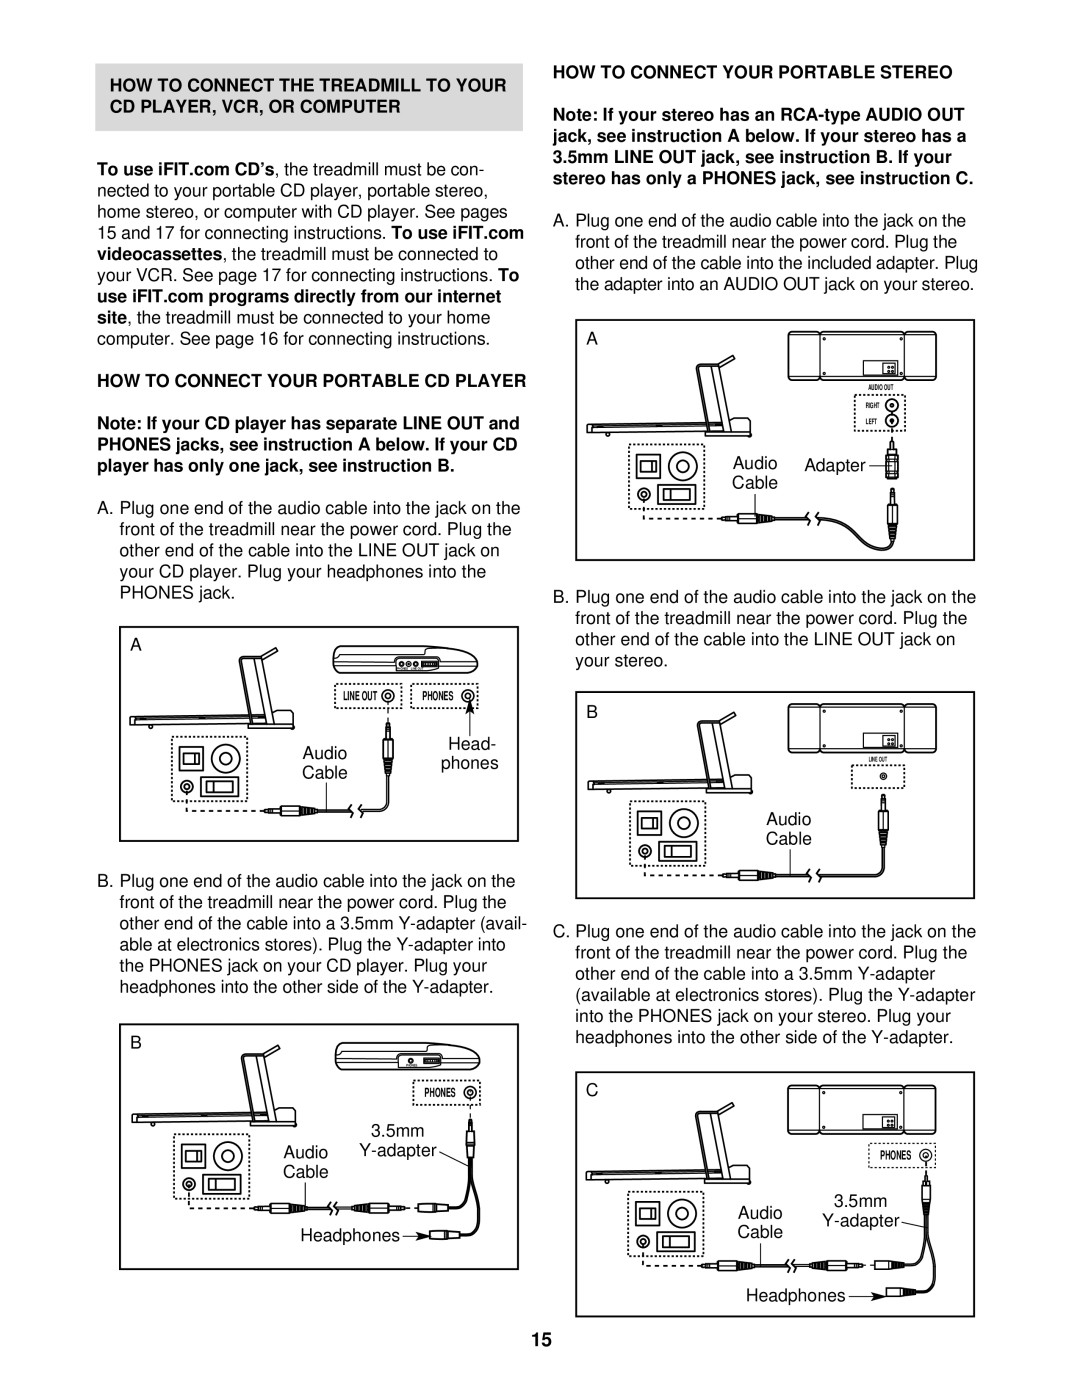 ProForm PFTL69213 user manual HOW to Connect Your Portable Stereo 